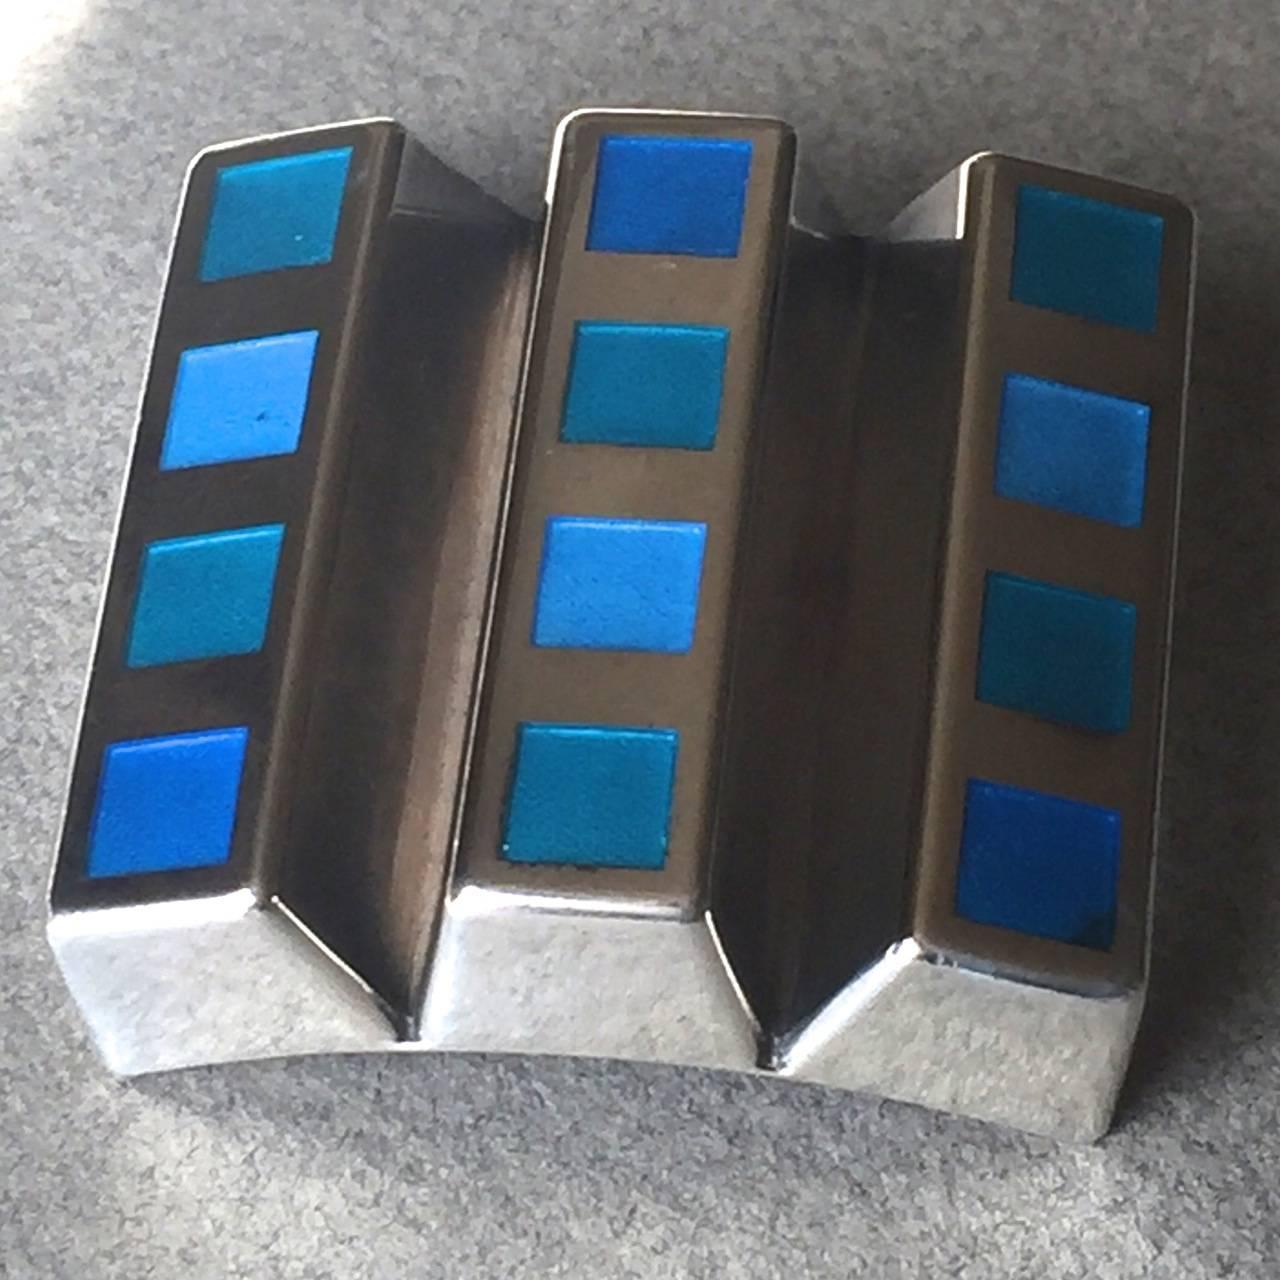 Georg Jensen Sterling Silver Brooch No. 333B by Nanna Ditzel

Rare, enameled, large brooch set in sterling silver. The enamel is in varying shades of a vivid blue. 

This Danish Modern brooch is very hard to find and is in excellent